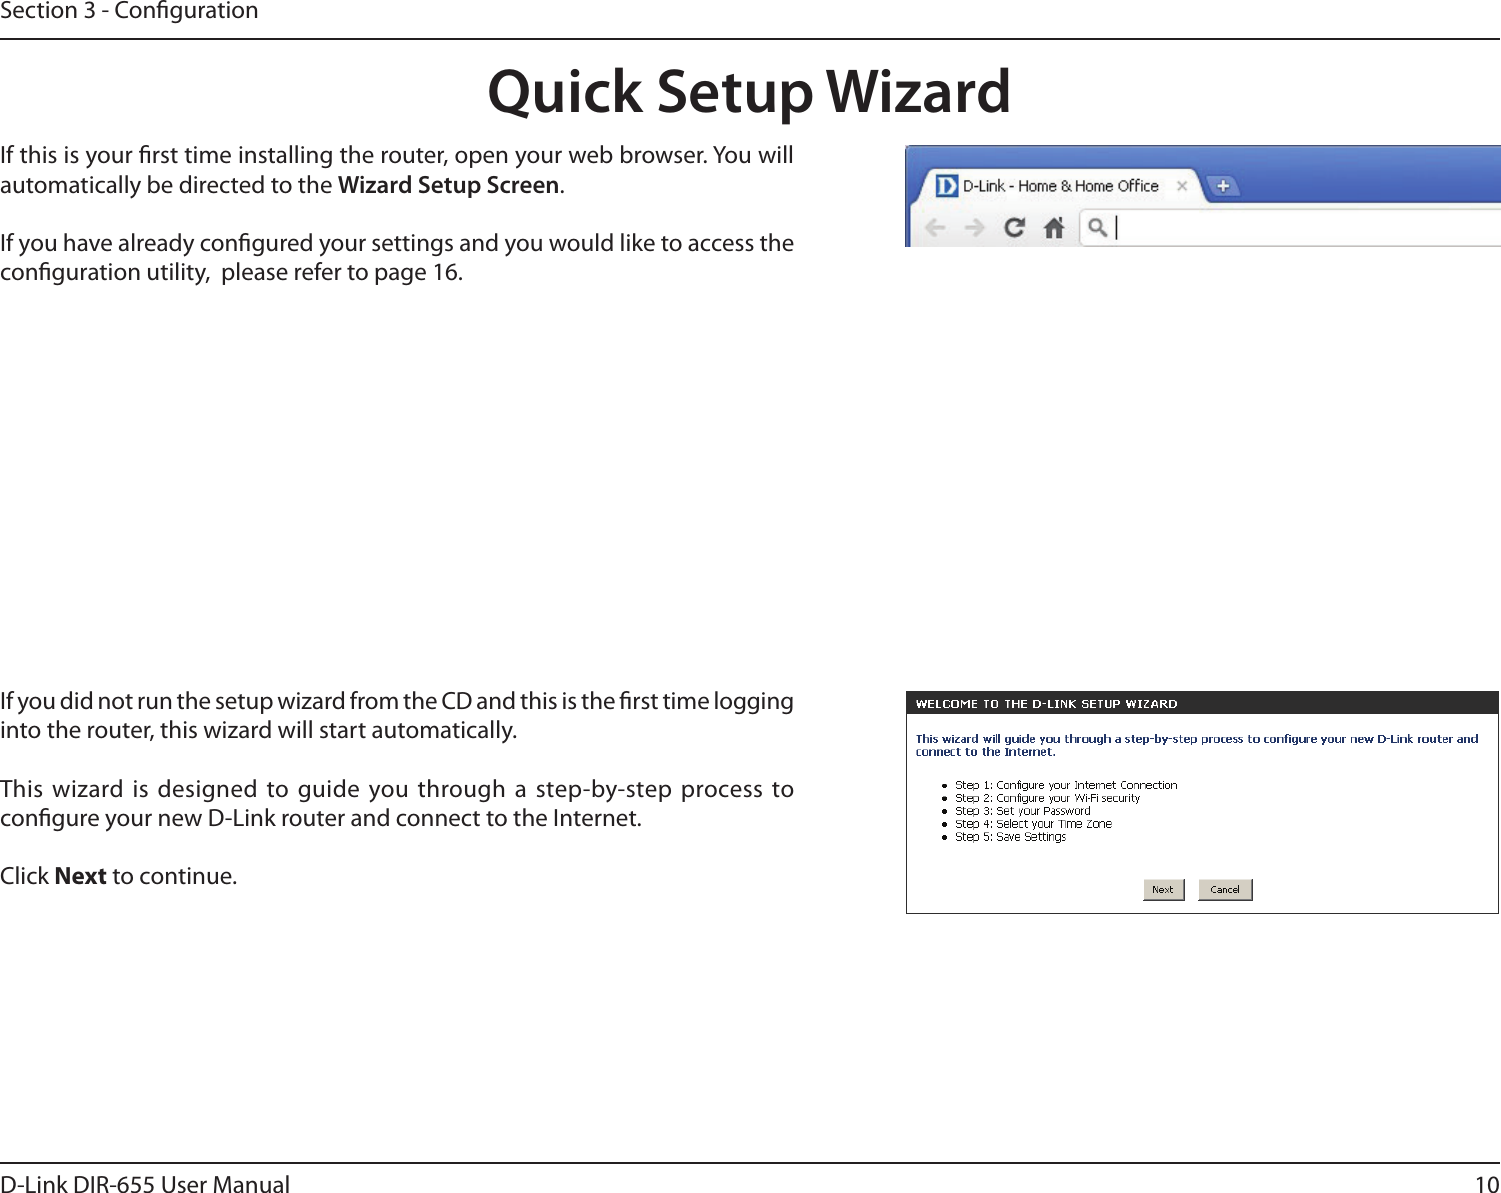 10D-Link DIR-655 User ManualSection 3 - CongurationIf you did not run the setup wizard from the CD and this is the rst time logging into the router, this wizard will start automatically. This wizard is designed to guide you through a step-by-step process to congure your new D-Link router and connect to the Internet.Click Next to continue. Quick Setup WizardIf this is your rst time installing the router, open your web browser. You will automatically be directed to the Wizard Setup Screen. If you have already congured your settings and you would like to access the conguration utility,  please refer to page 16.